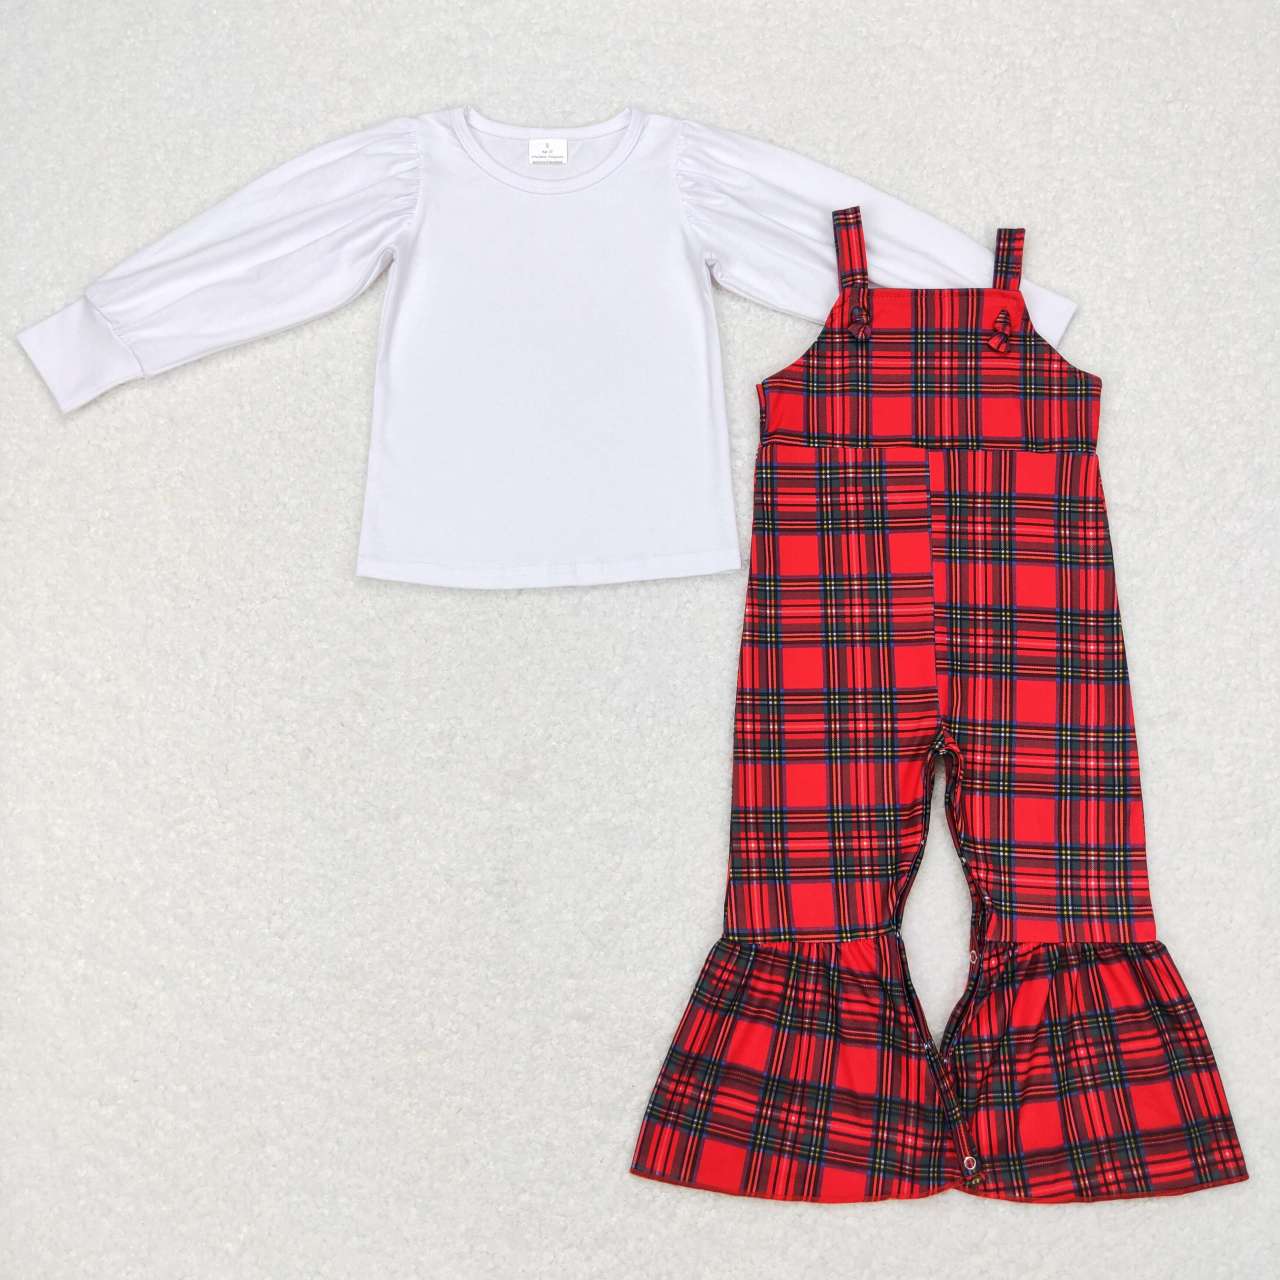 SR0479 Red Green Plaid Girls Christmas Jumpsuits